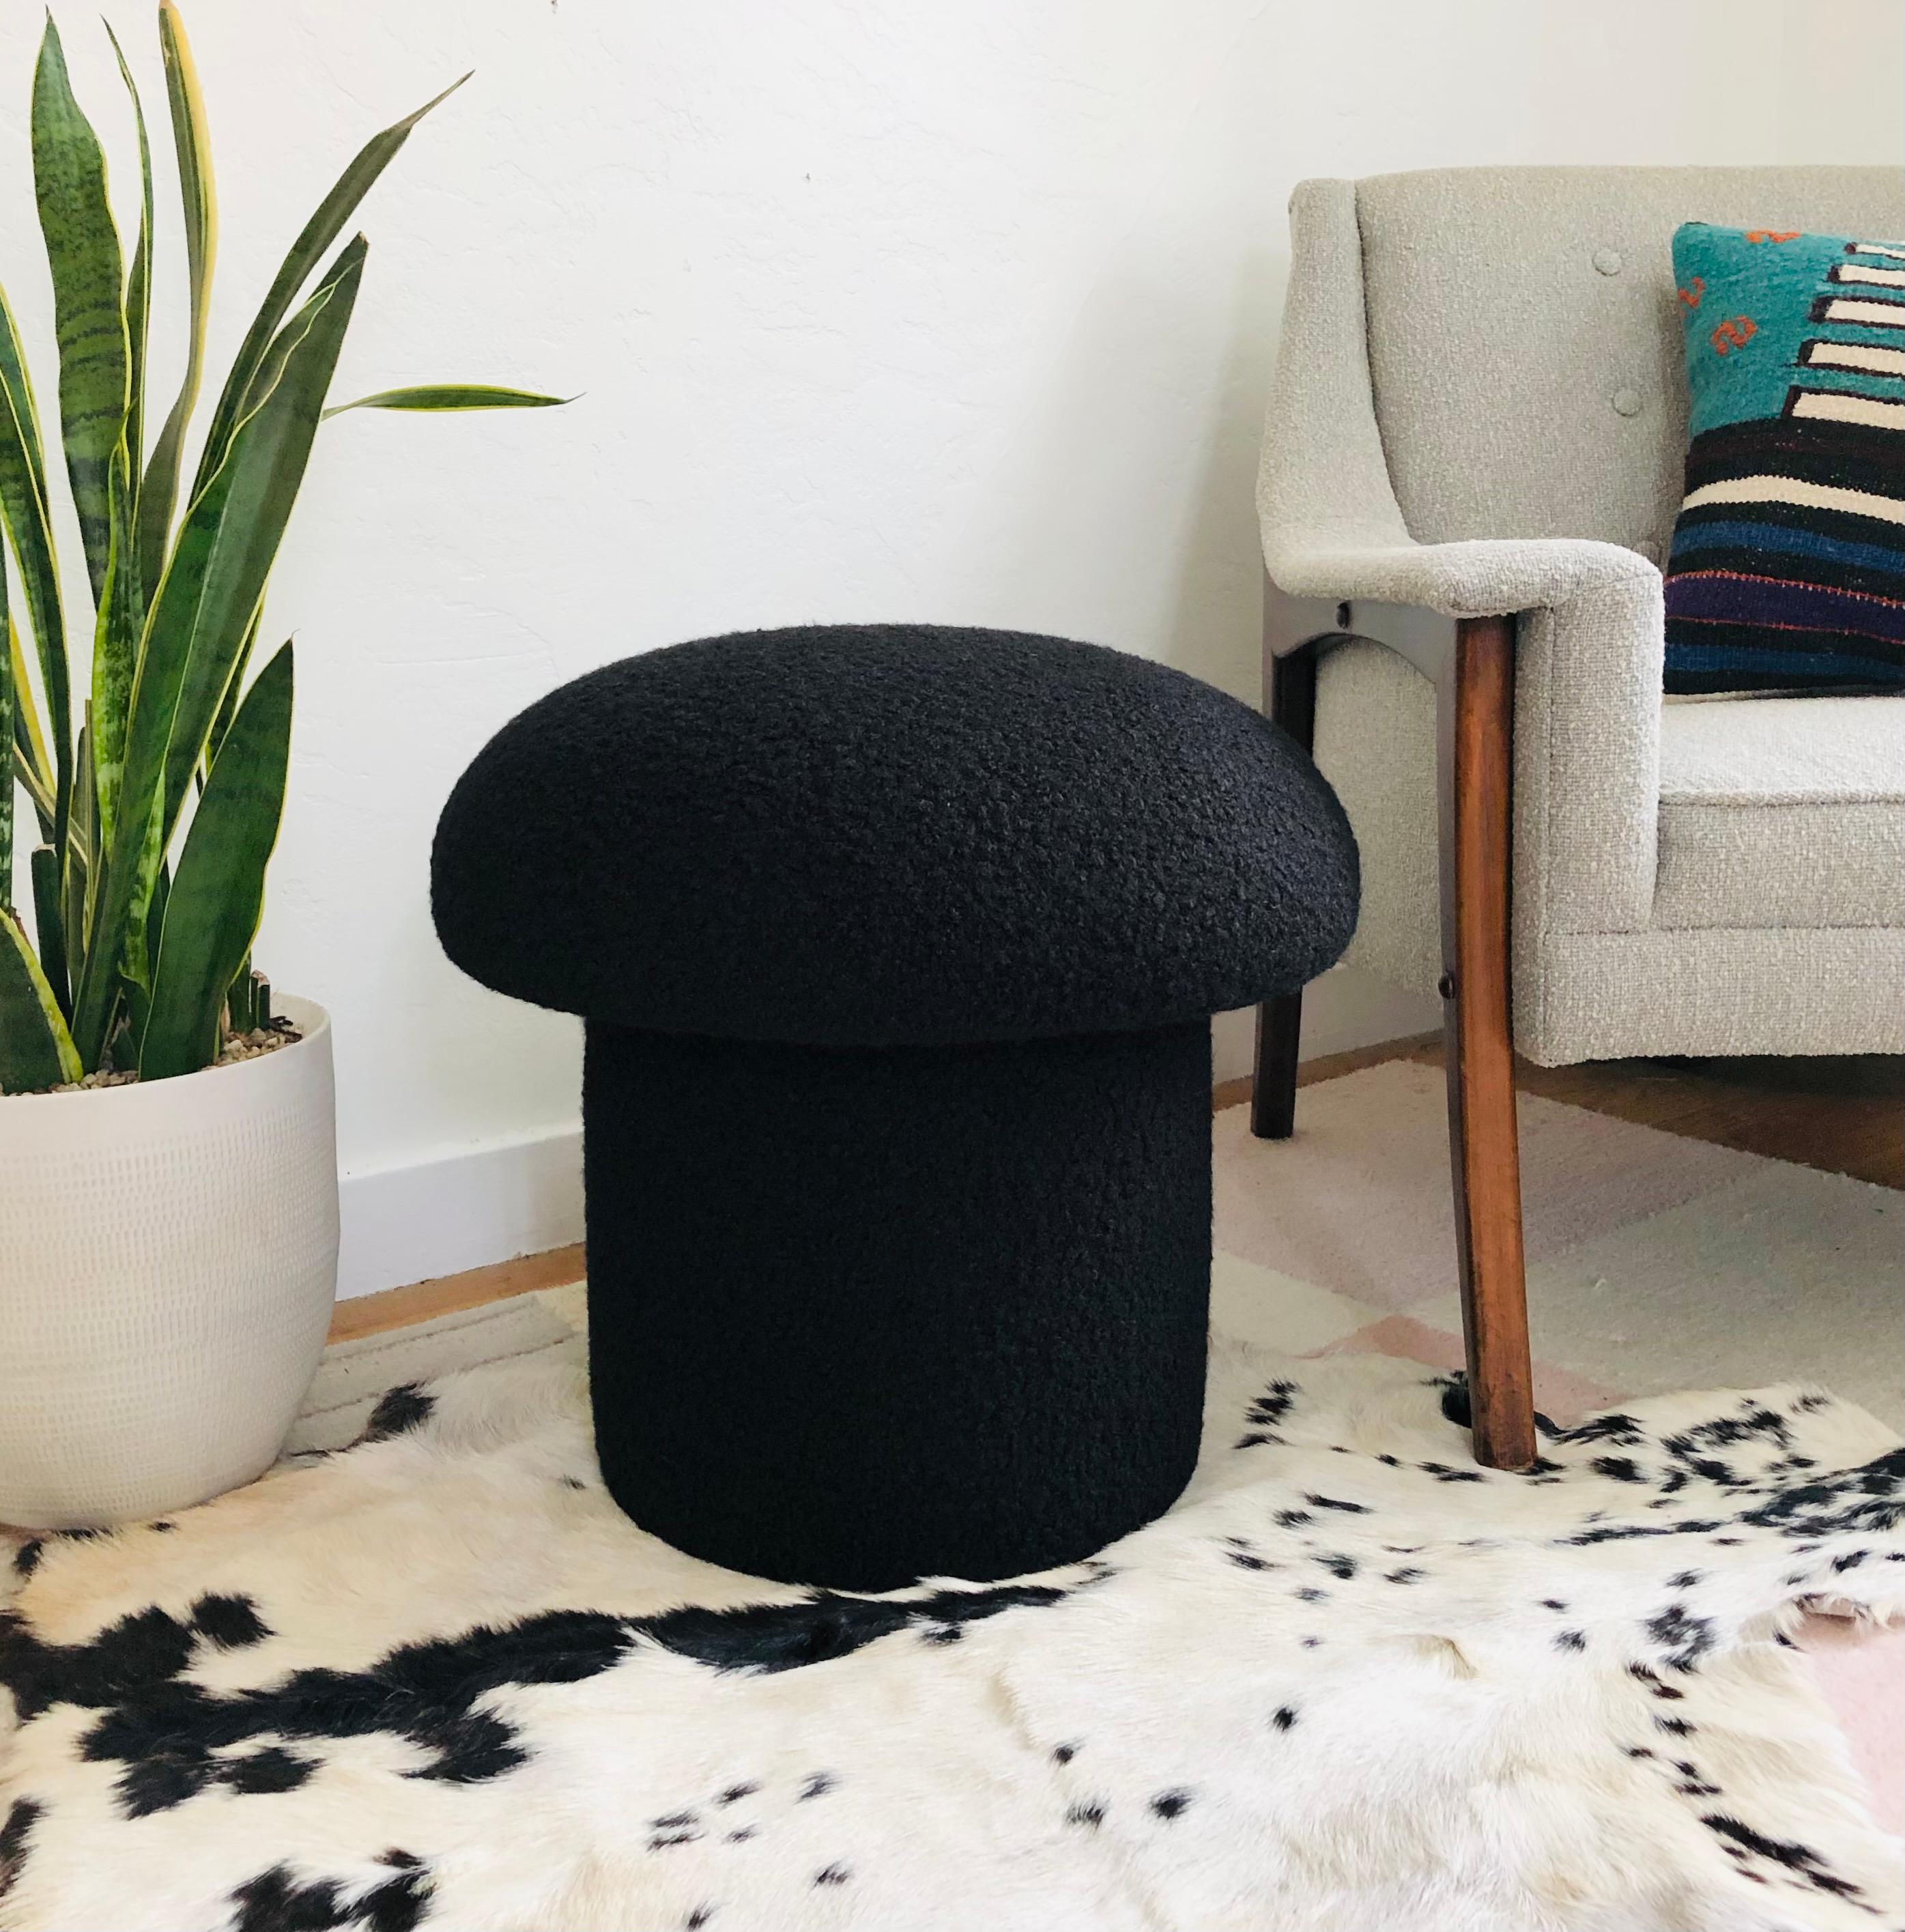 A handmade mushroom shaped ottoman, upholstered in a black curly boucle fabric. Perfect for using as a footstool or extra occasional seating. A comfortable cushioned seat and sculptural accent piece.
Mushroom ottomans are made to order,